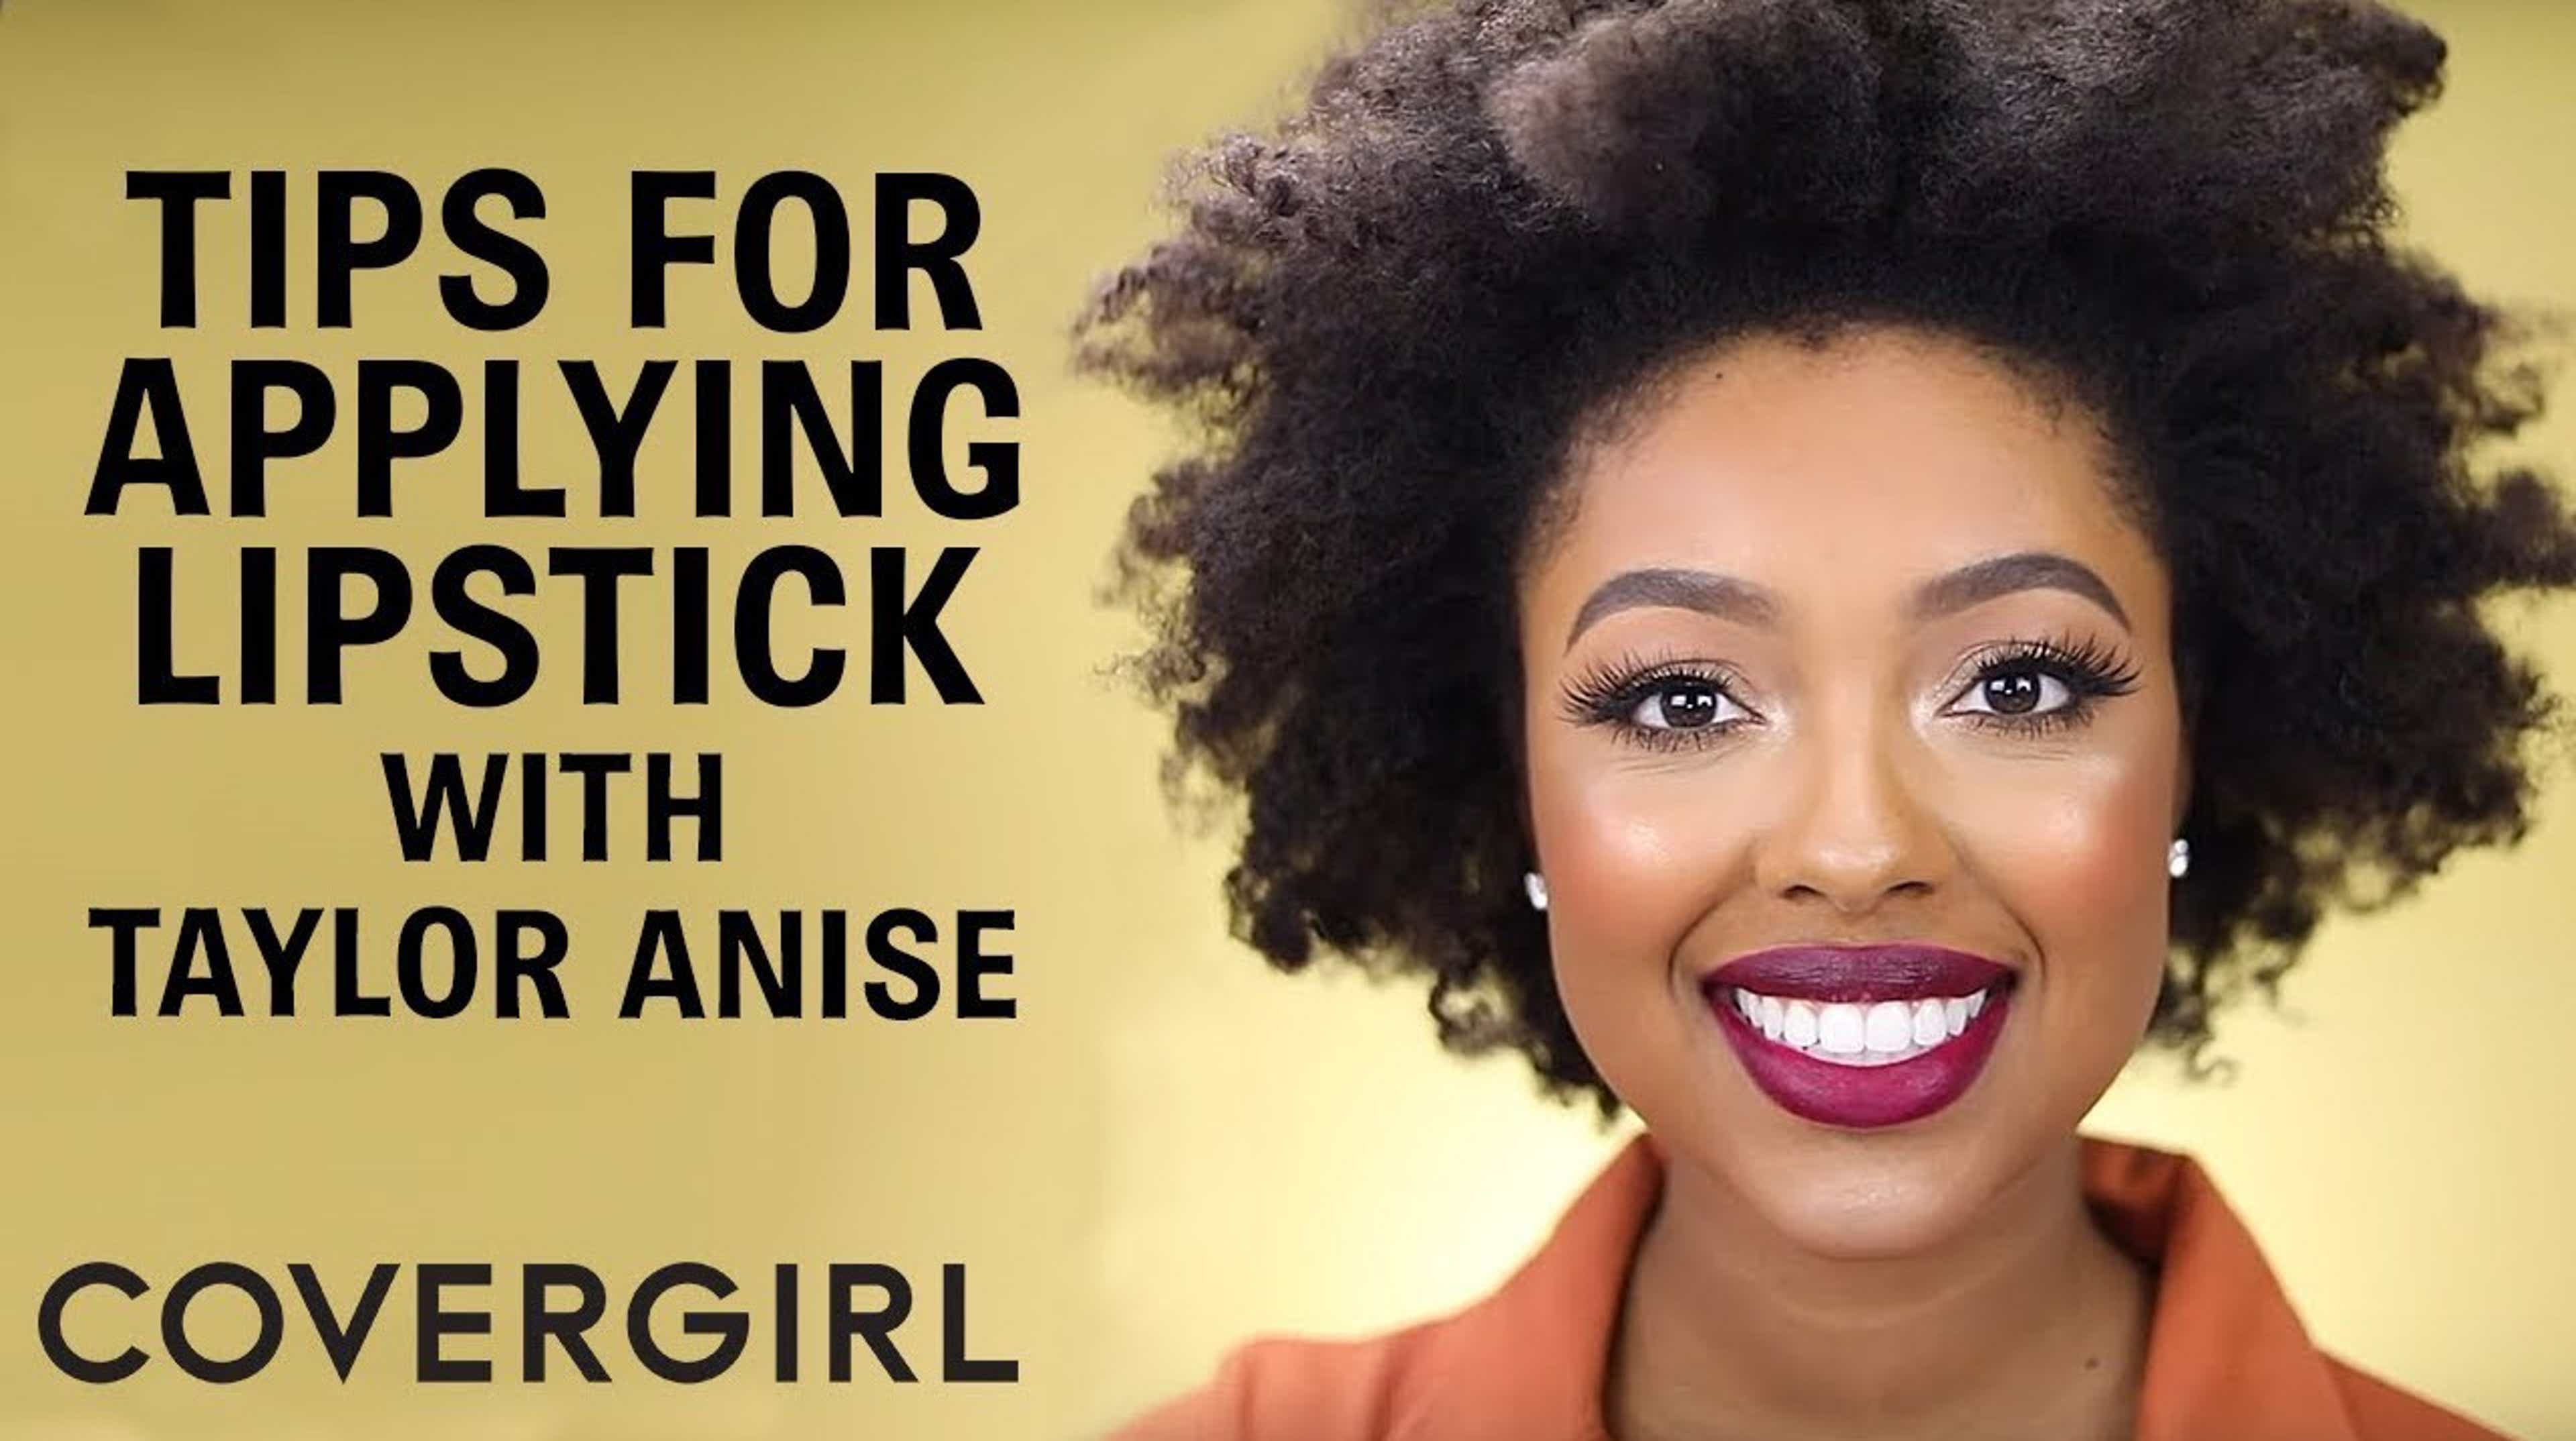 Tips for Applying Lipstick with Taylor Anise